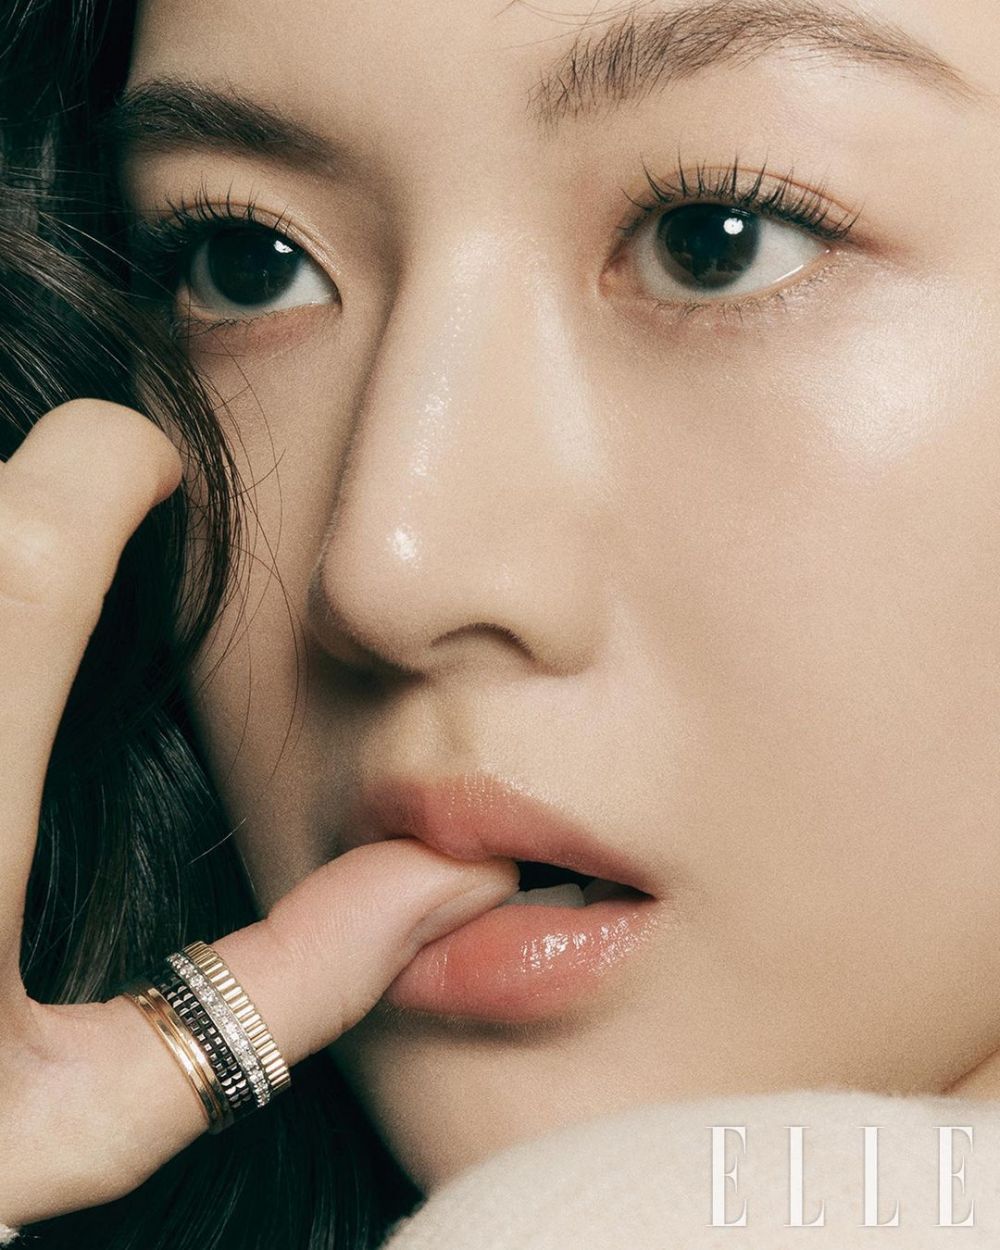 go yoon jung @ marie claire